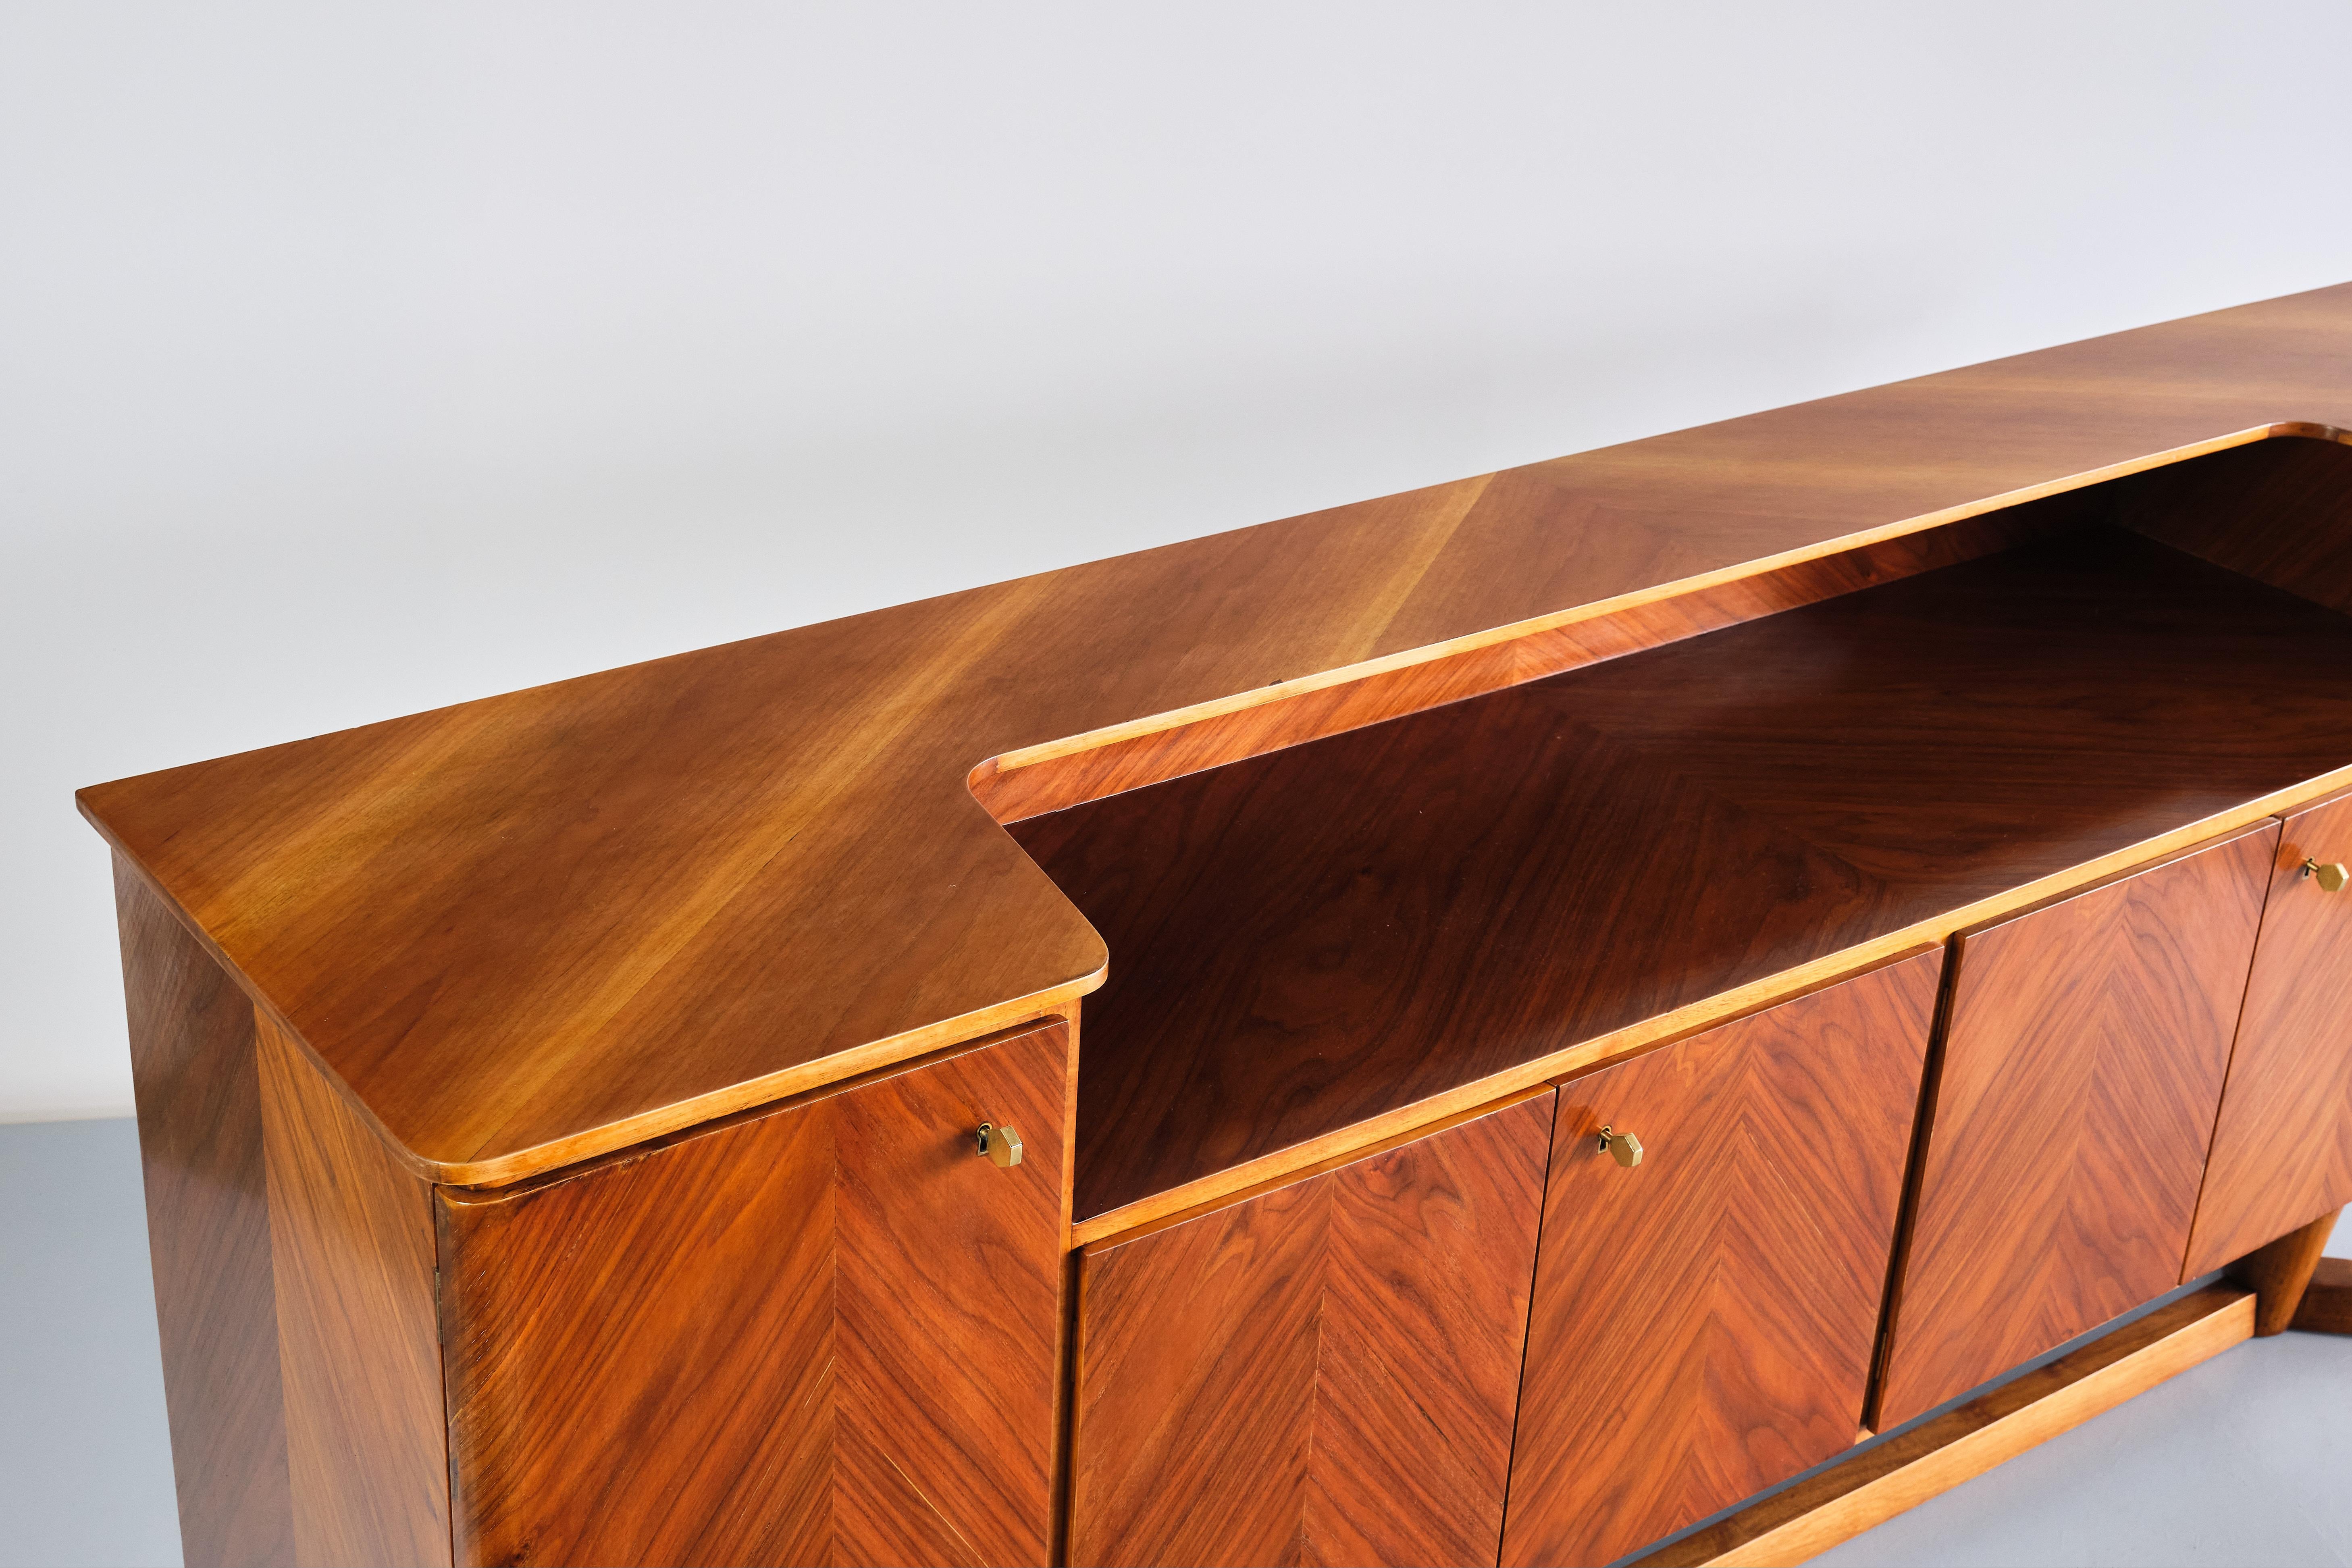 Paolo Buffa Attributed Sideboard in Walnut and Brass, Serafino Arrighi, 1940s For Sale 7